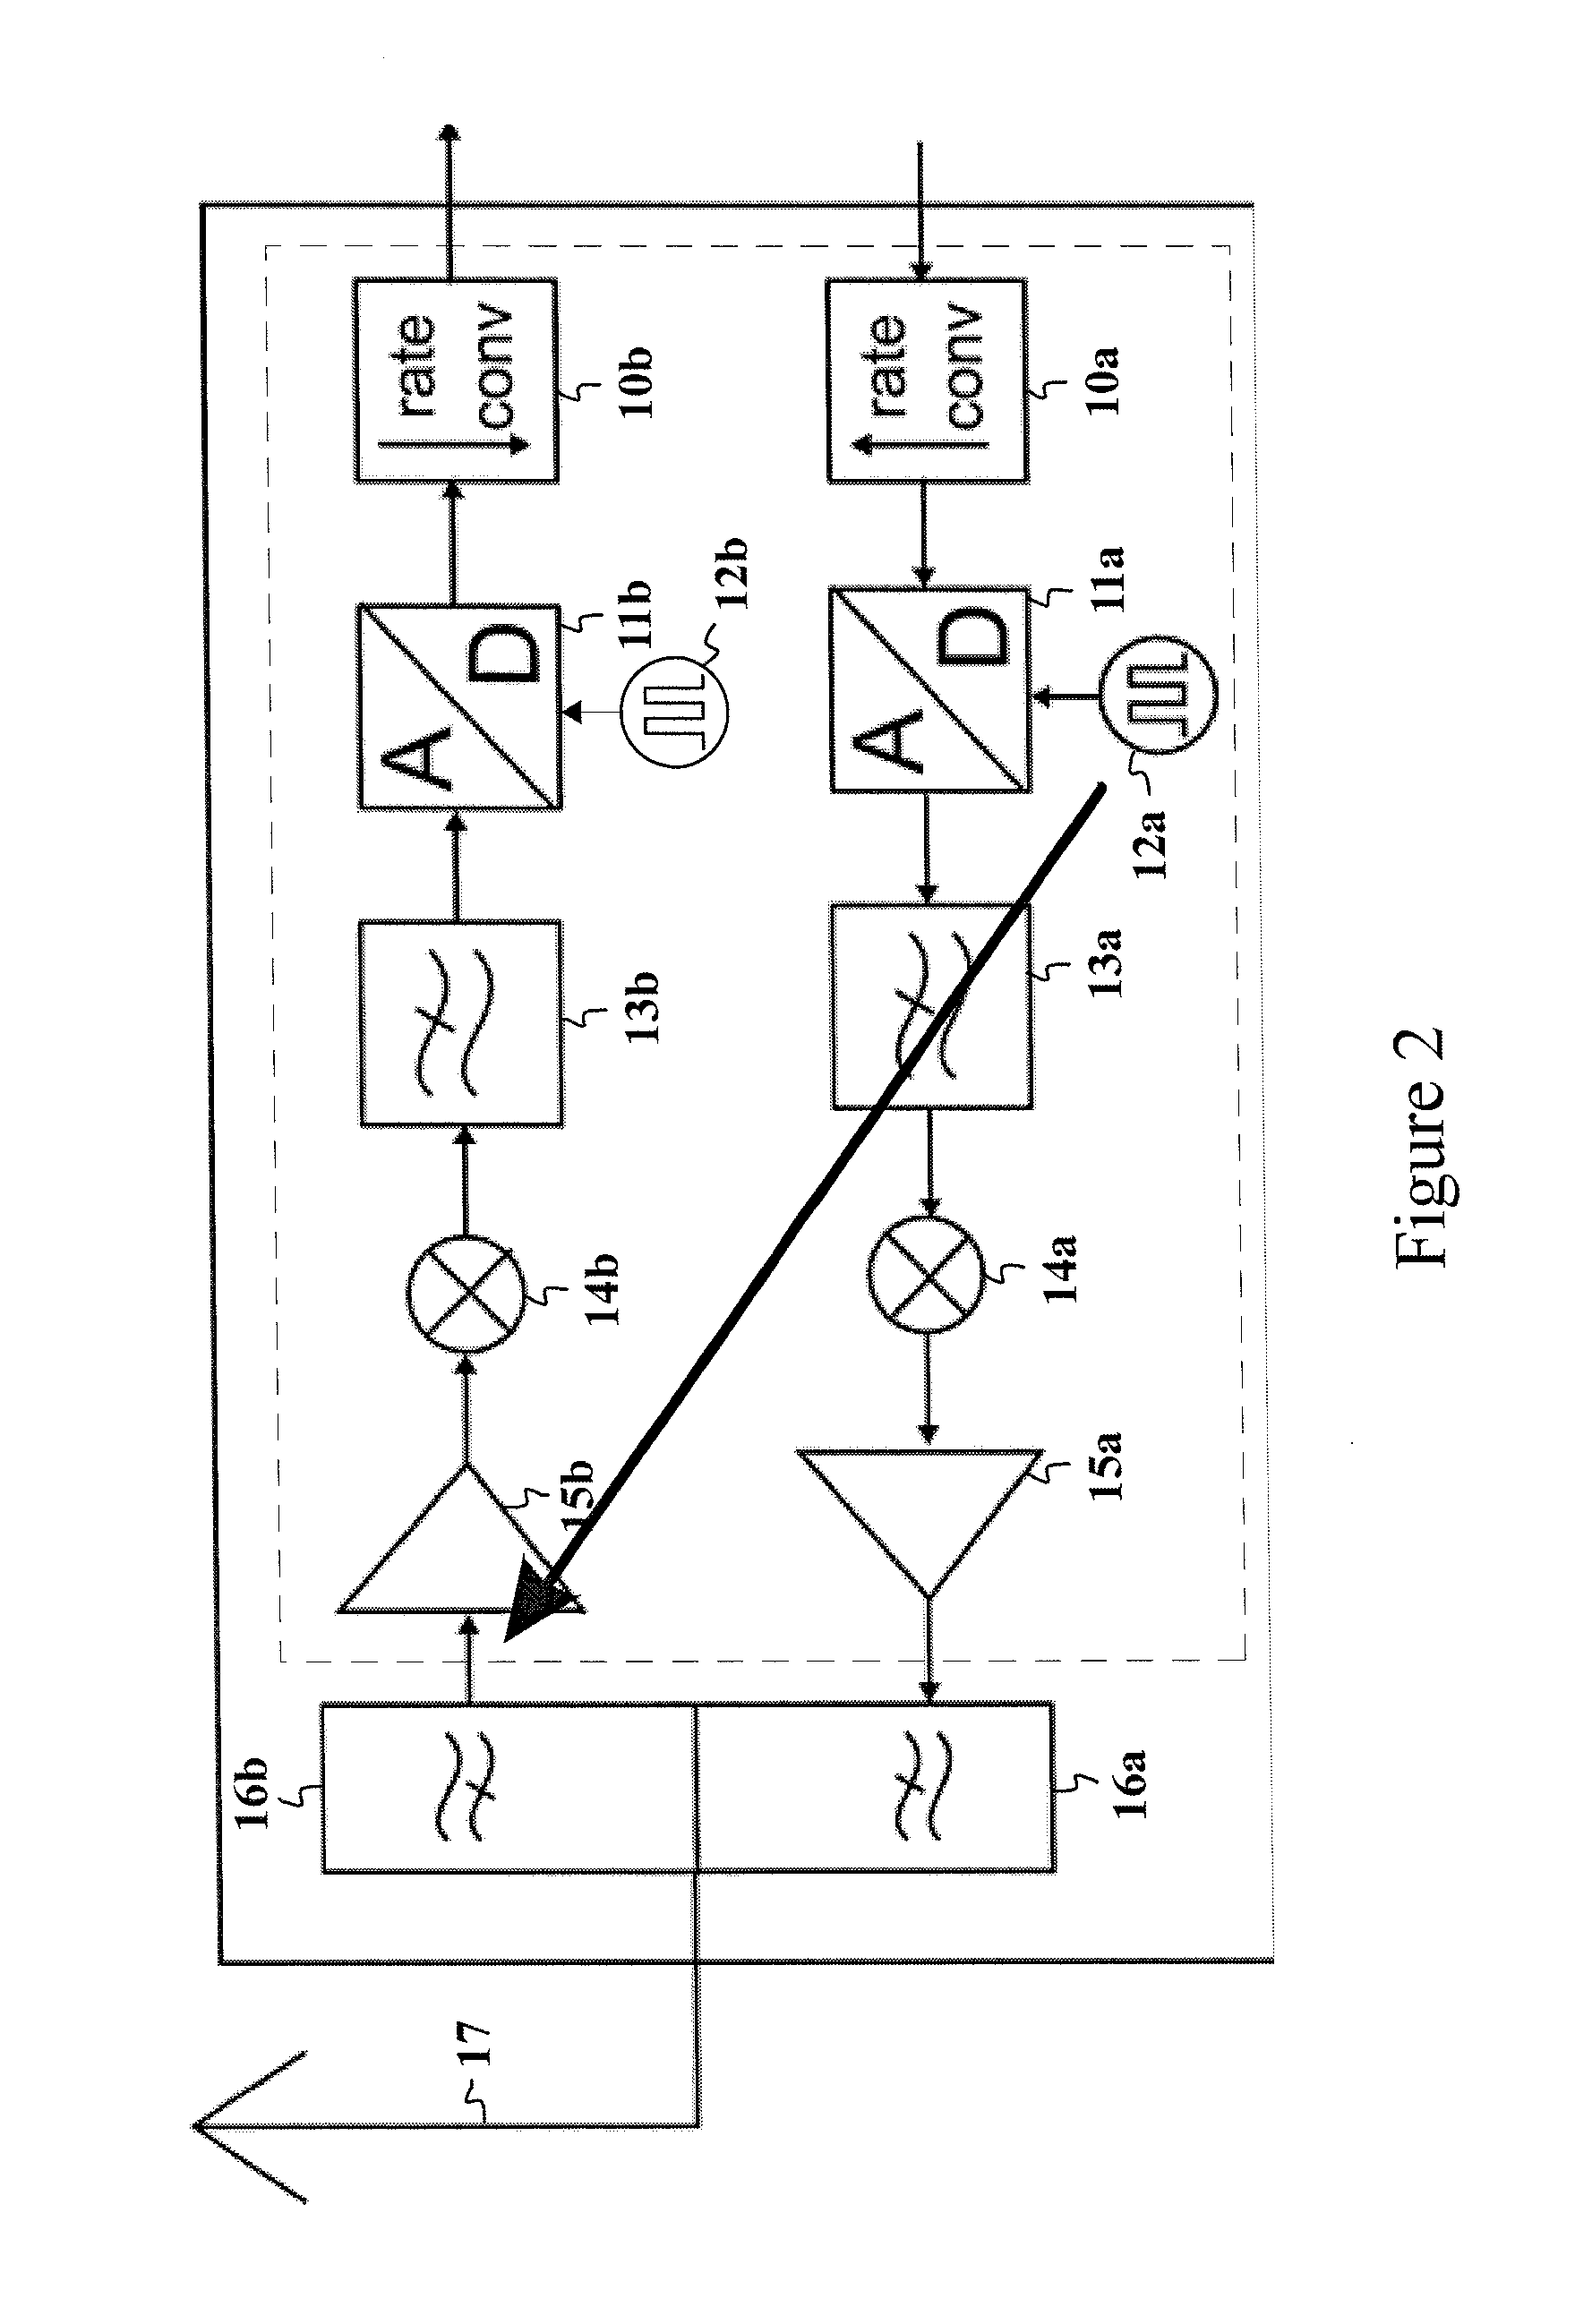 Transmitter with a Variable Sampling Rate